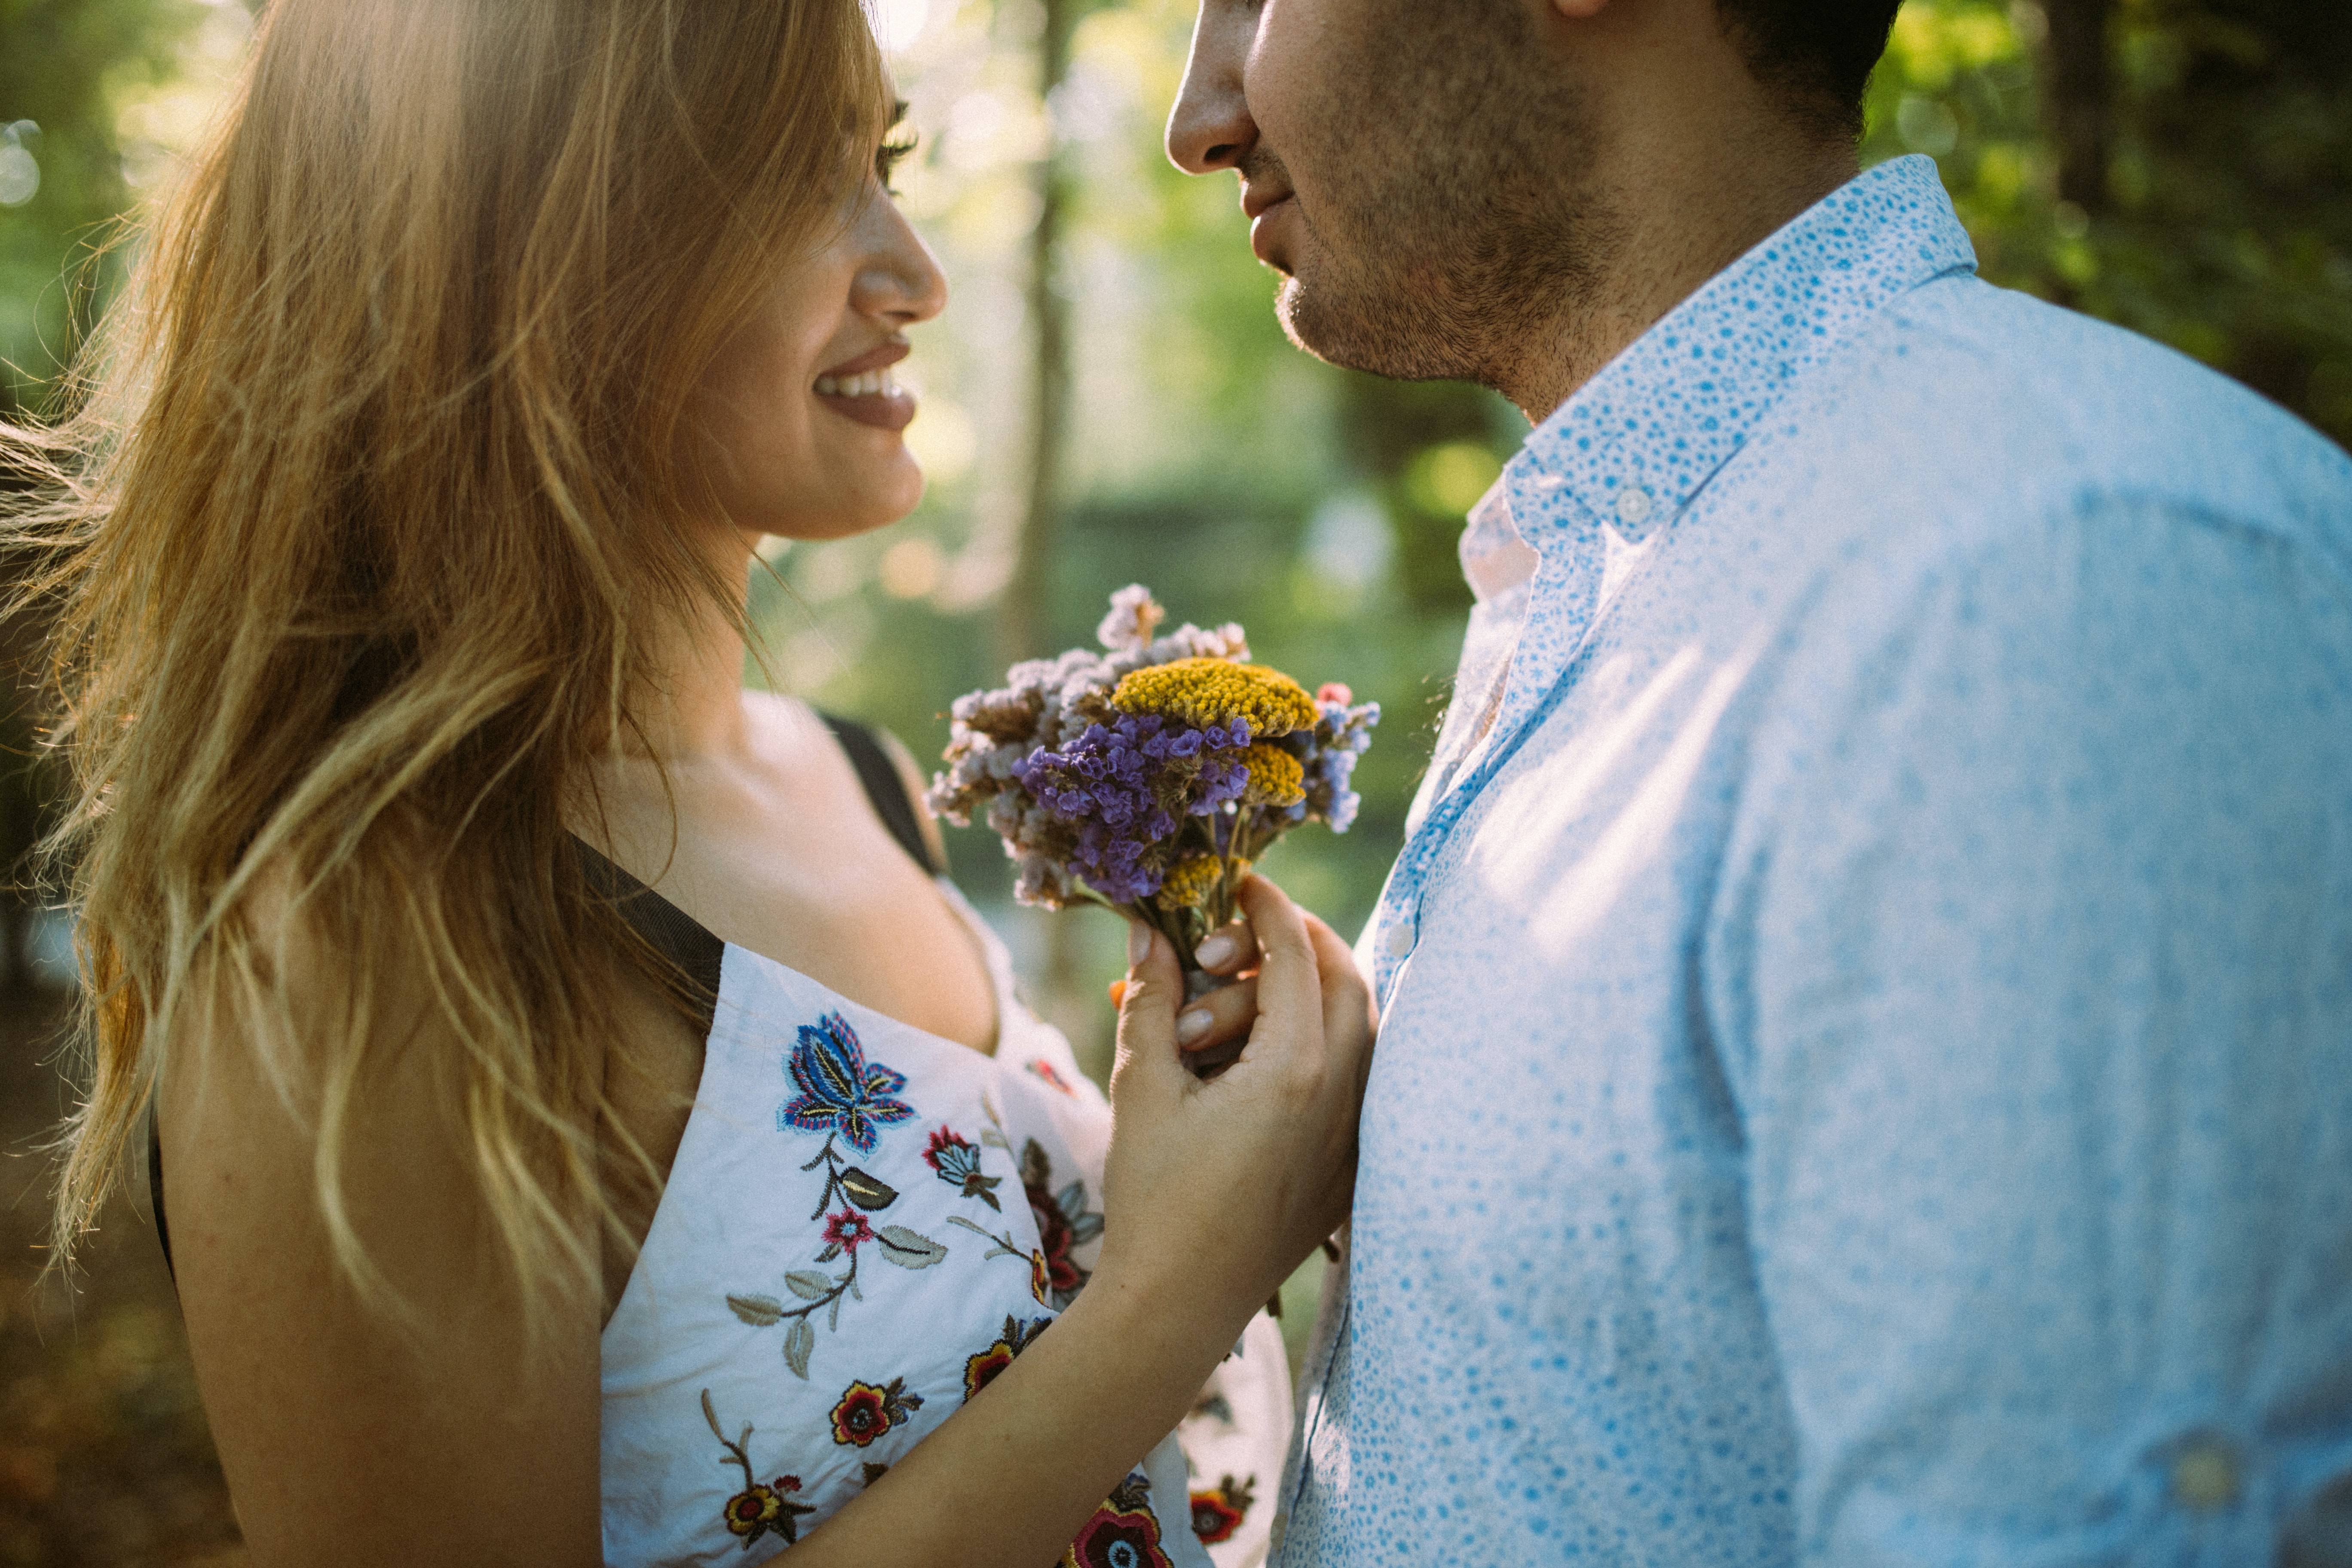 A photo of a man and a woman facing each other while holding flowers | Source: Unsplash